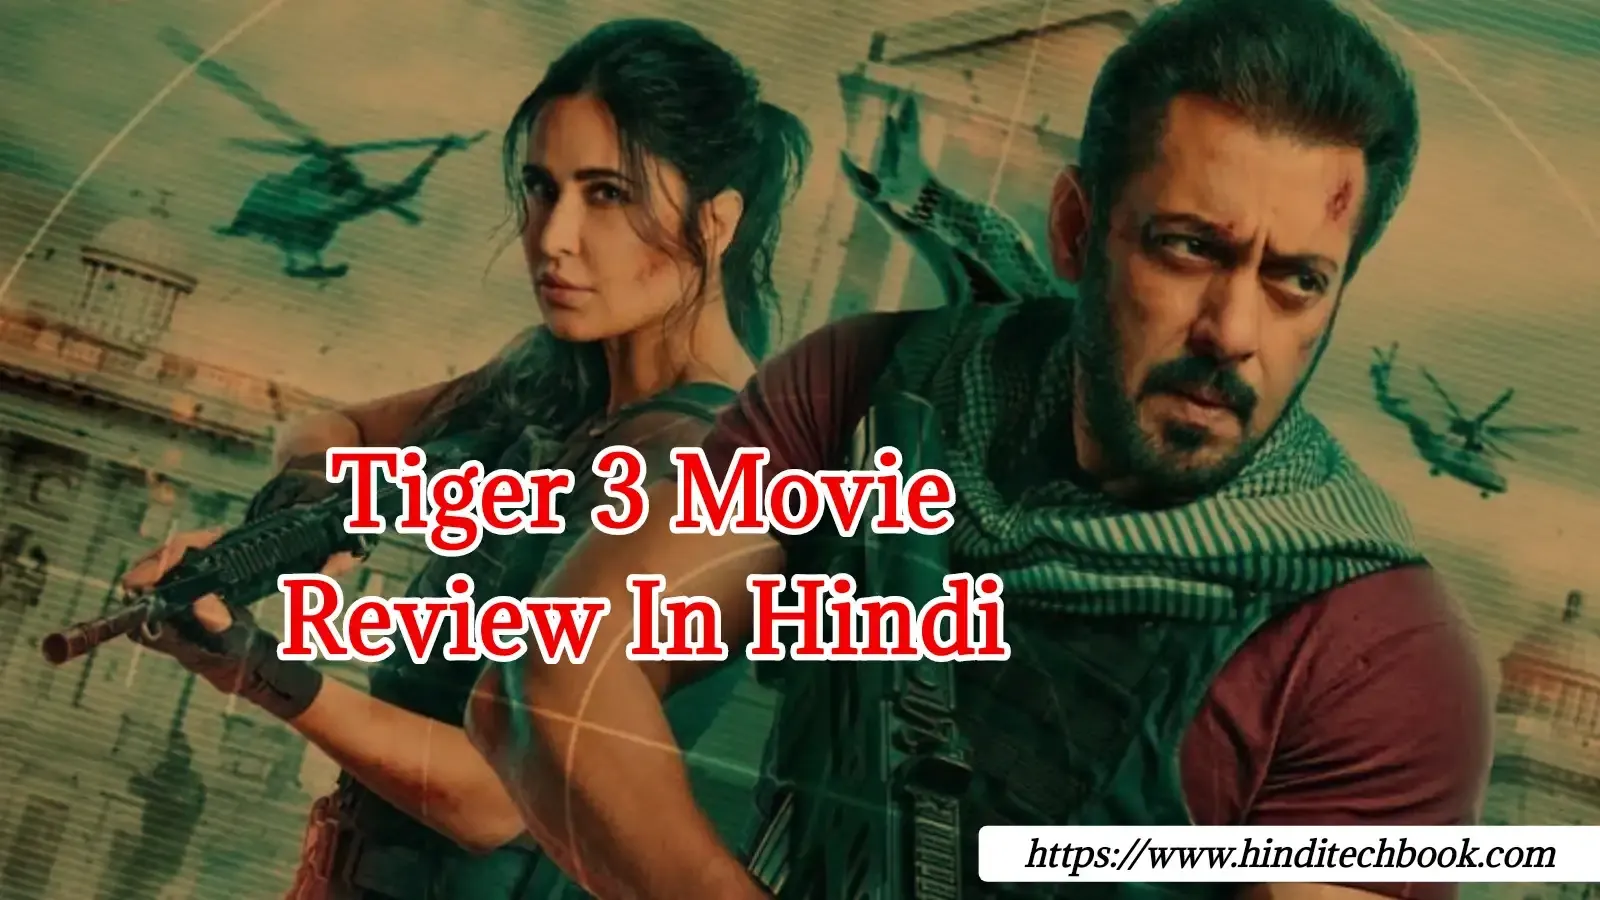 Tiger 3 Movie Review In Hindi